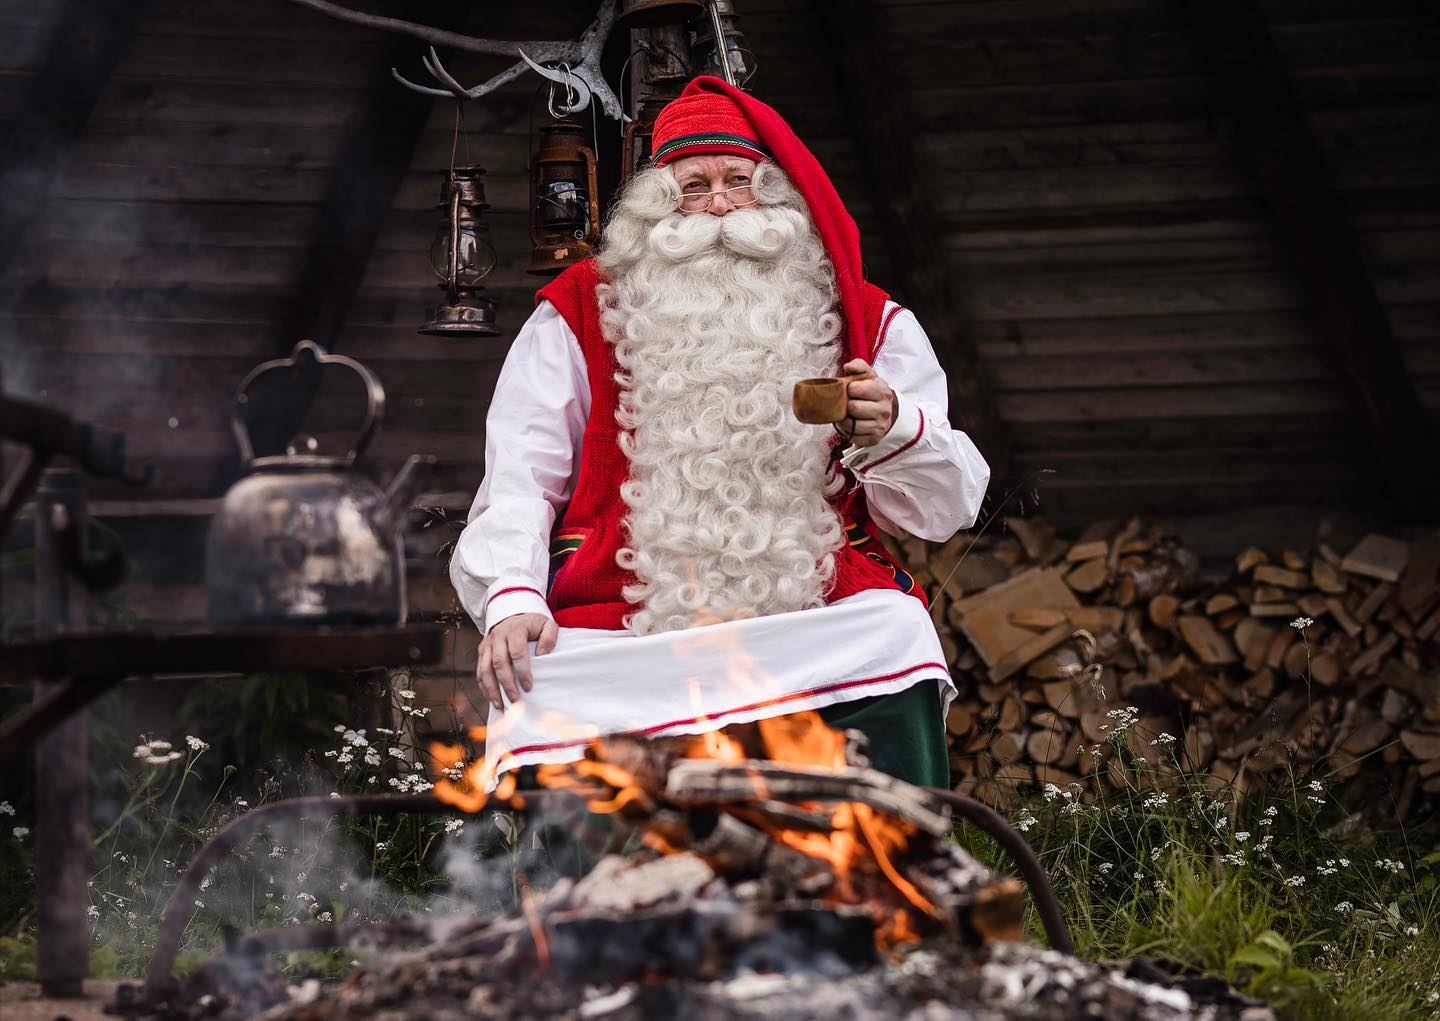 Long time no Santa Claus here! What would you say to him if you would meet him? And what do you think – is Santa Claus drinking coffee or tea? 

#santaclaus #visitrovaniemi #rovaniemi #arcticcircle #lapland #outdoorphotography